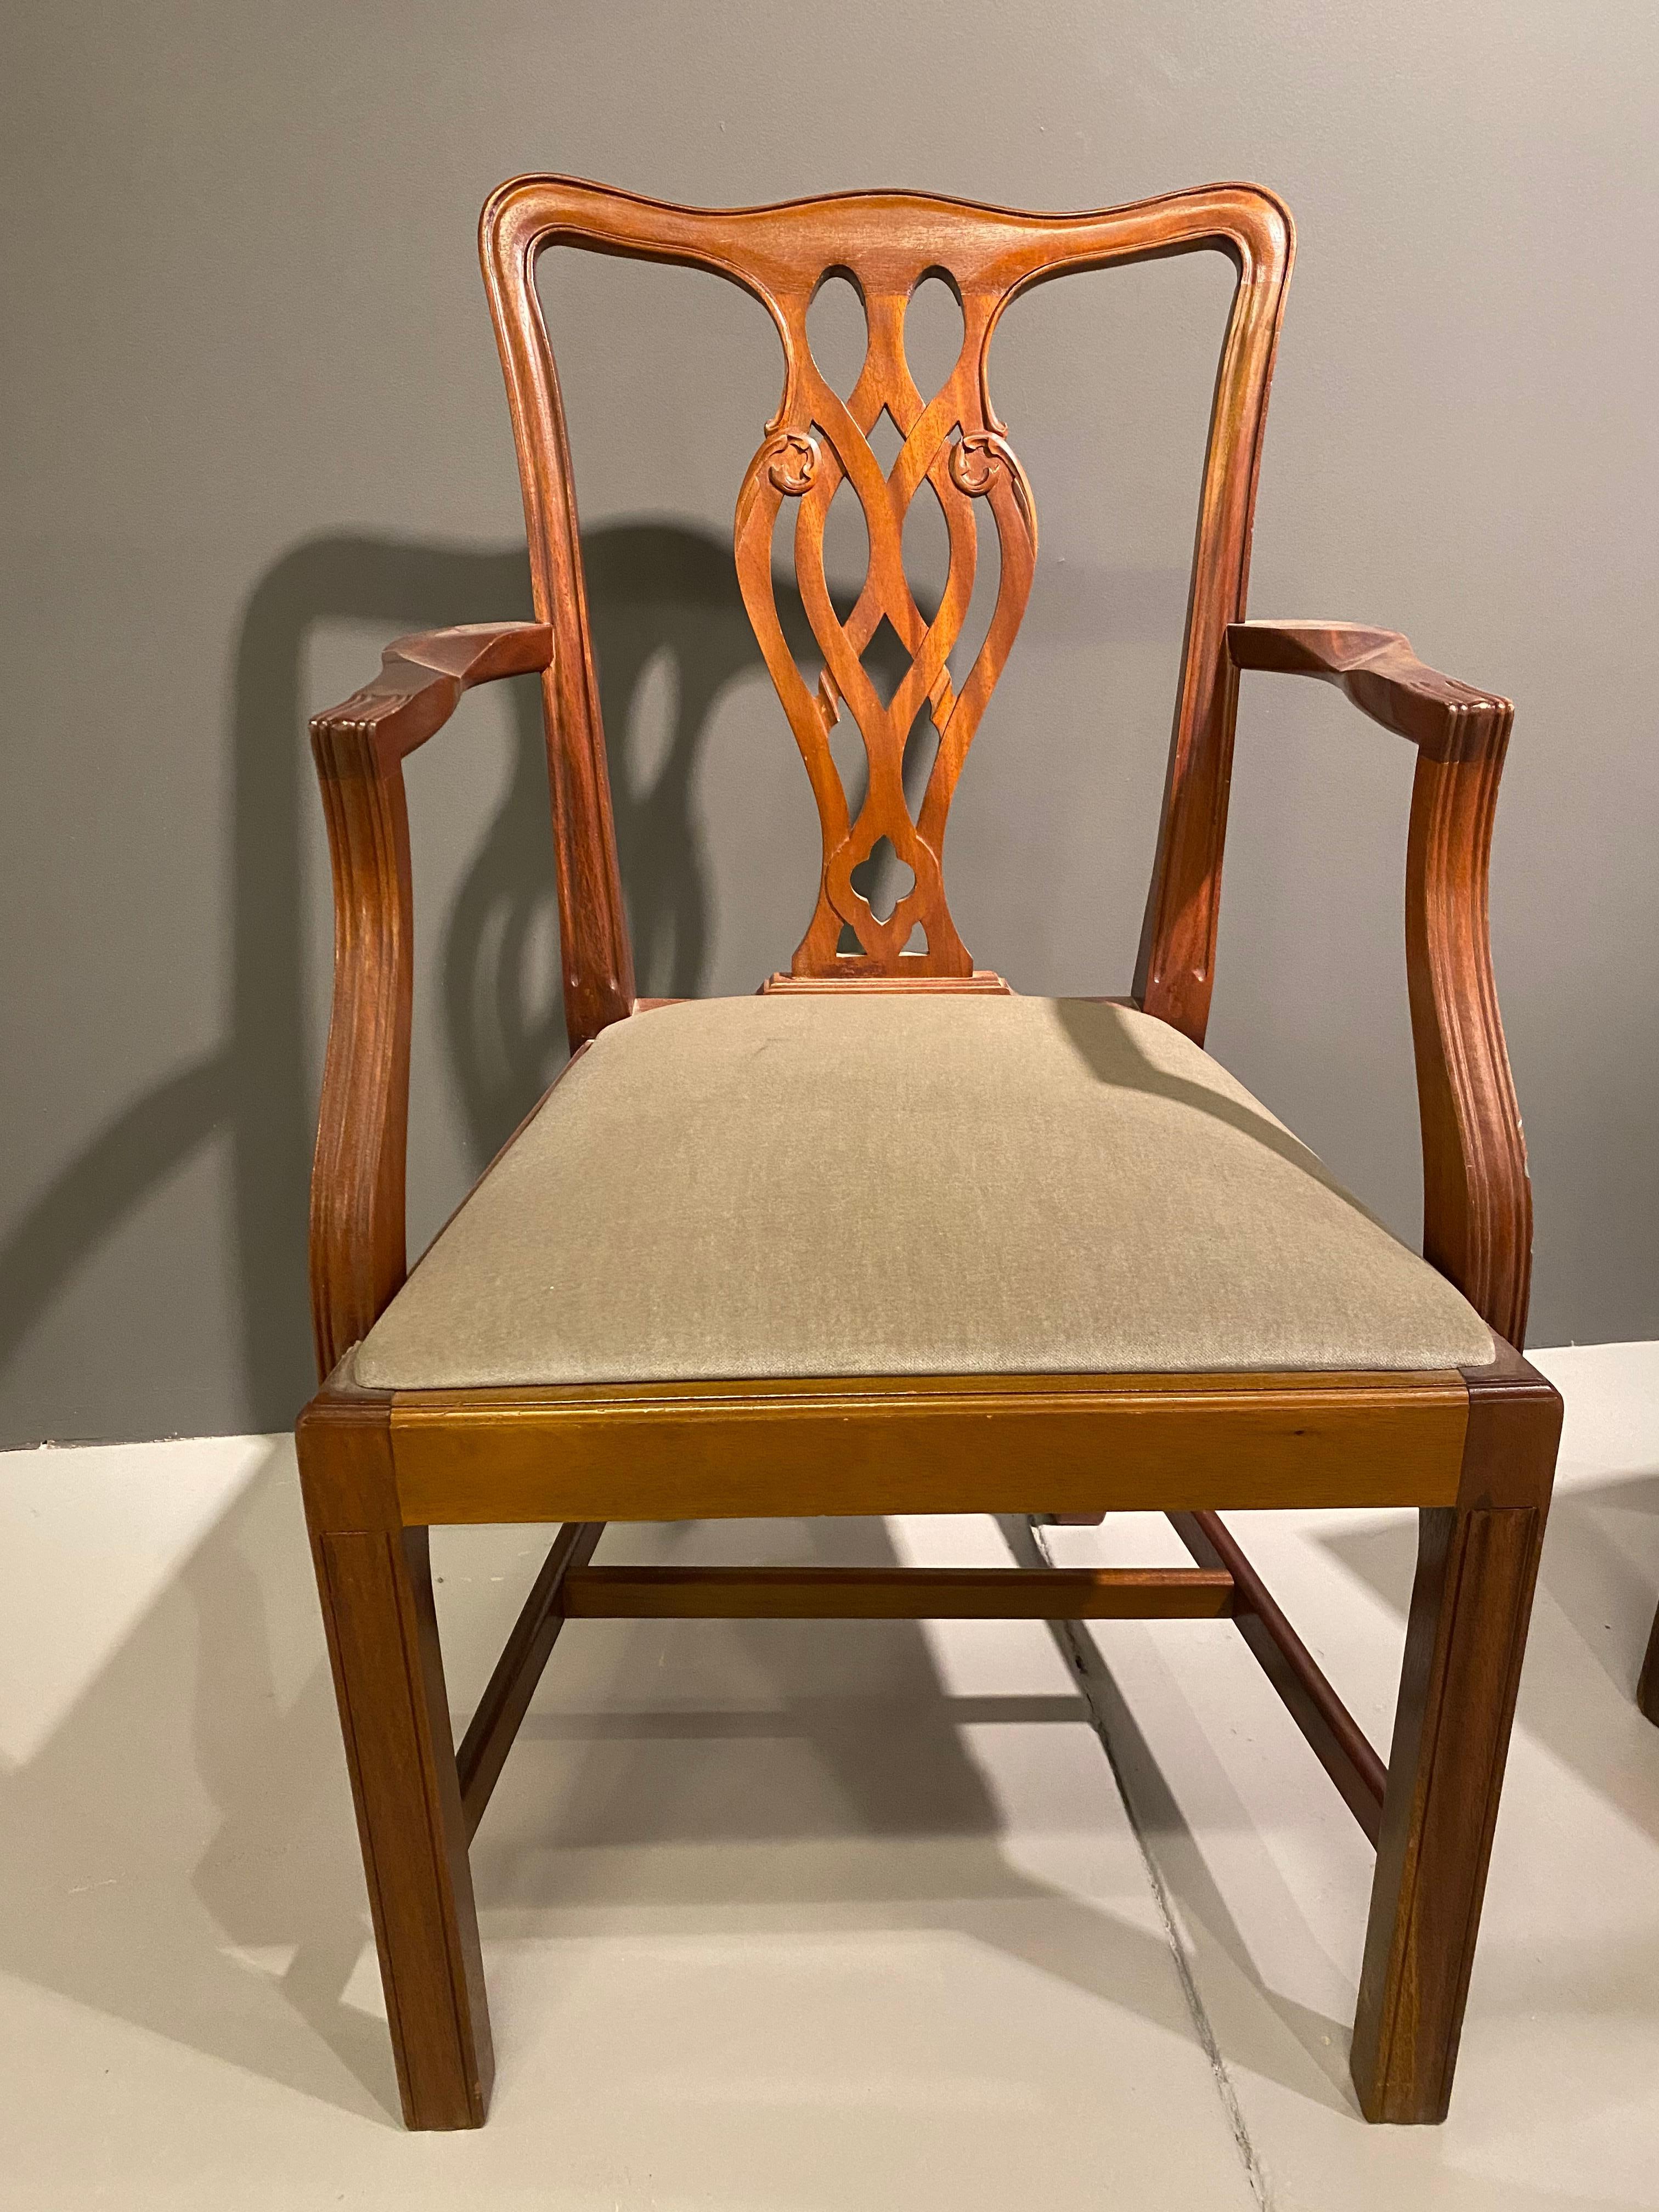 English Dining Chairs, Mahogany, Georgian Style, Made in England, Set of Eight